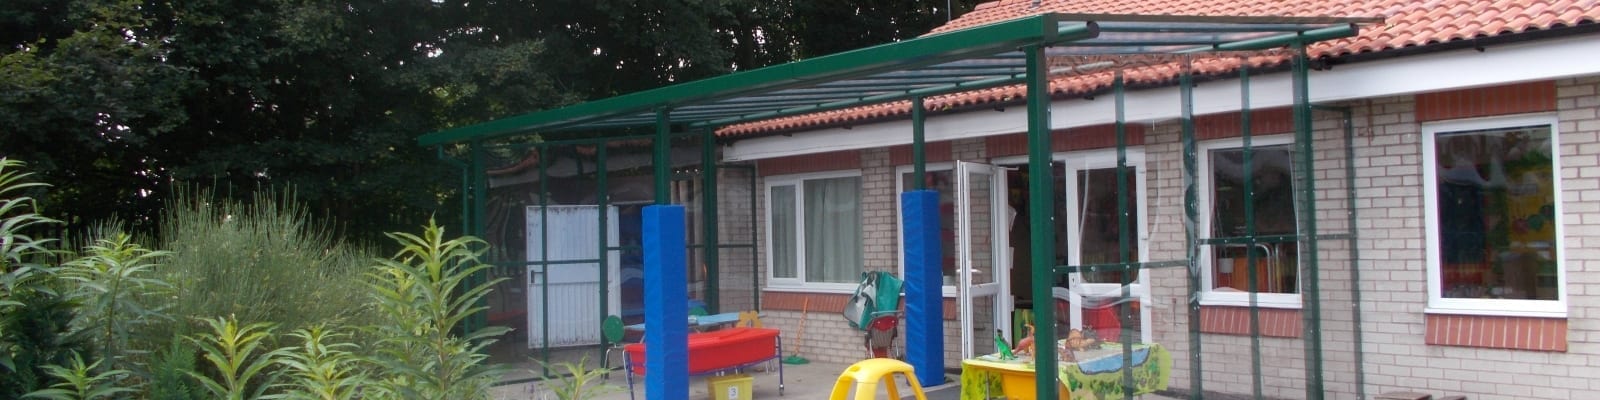 St Gilbert's RC Primary School Green Canopy